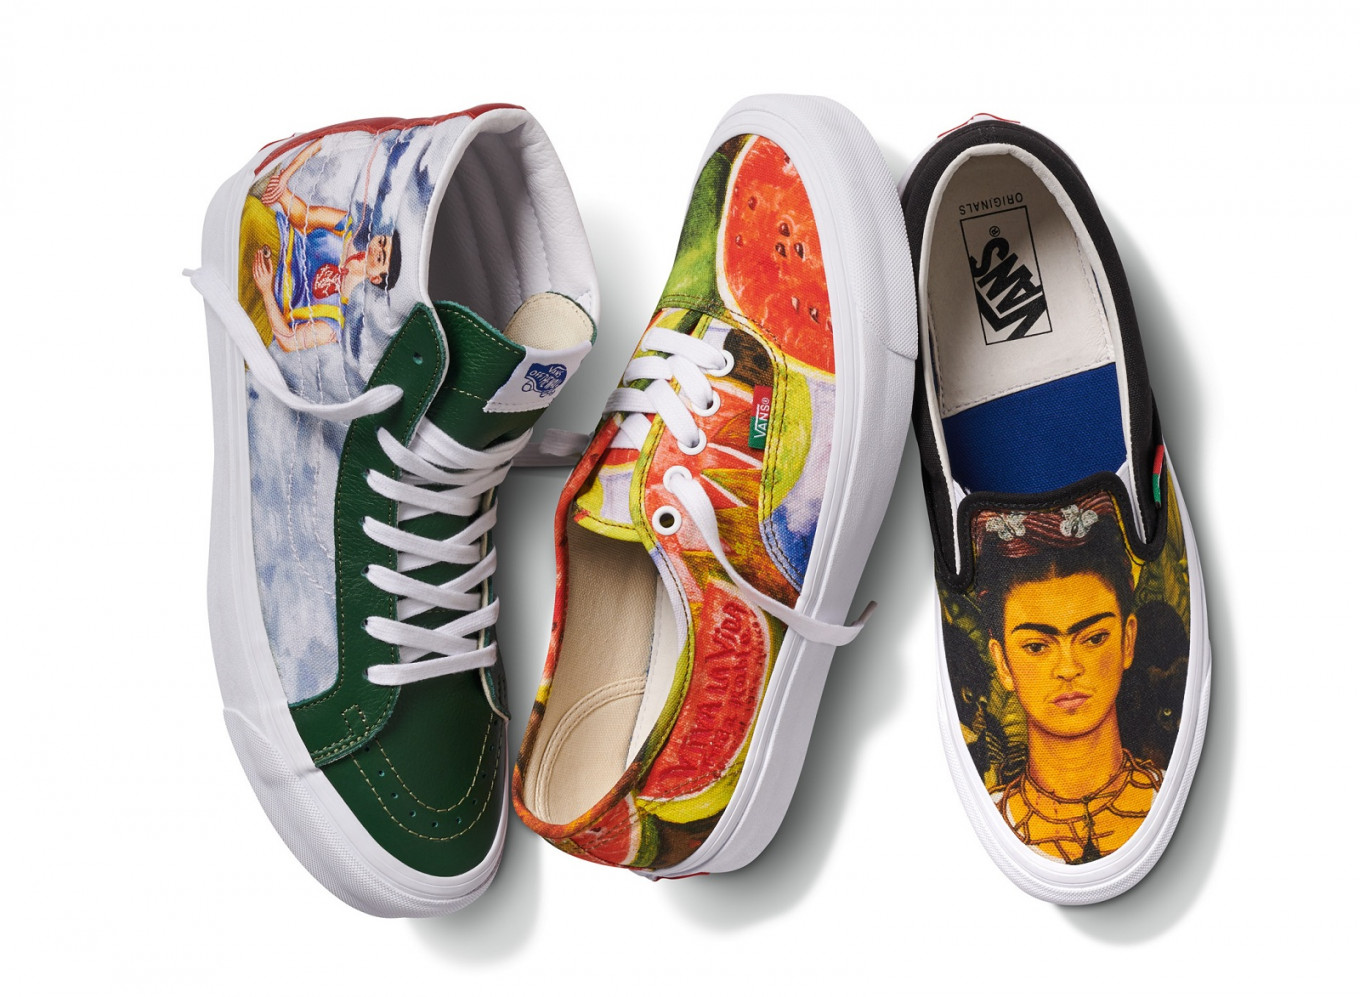 Vans' Frida Kahlo collection to be 